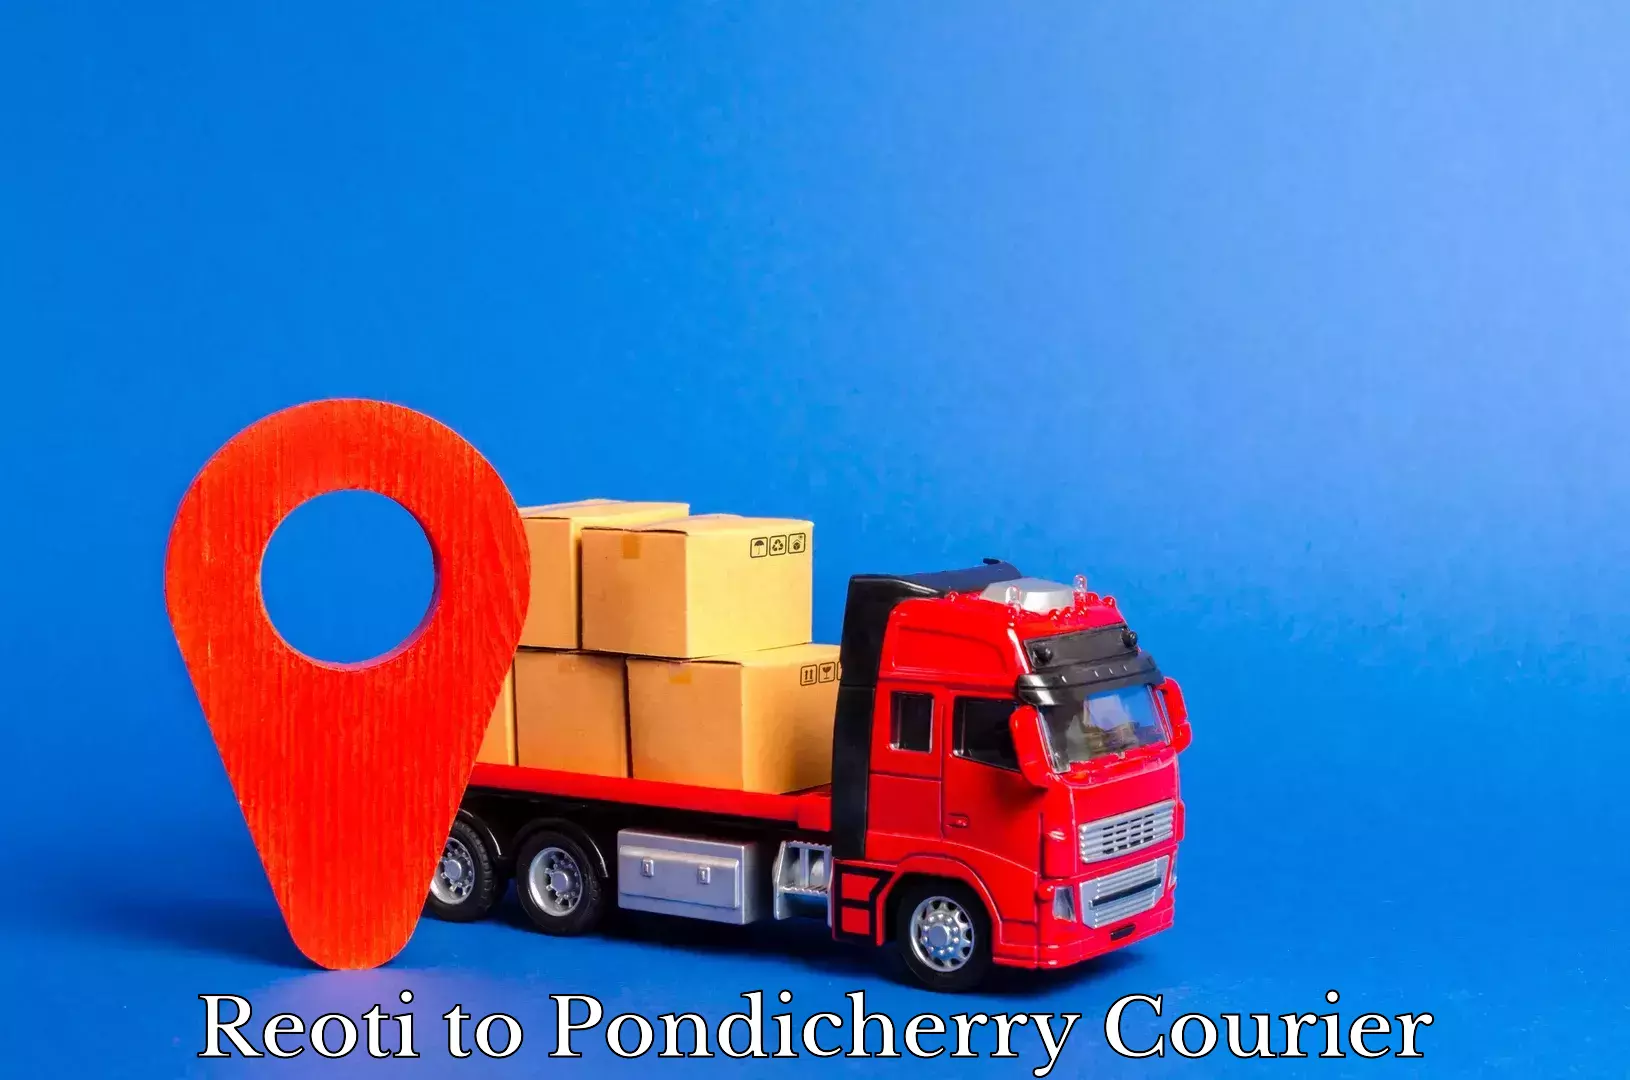 Multi-national courier services Reoti to Pondicherry